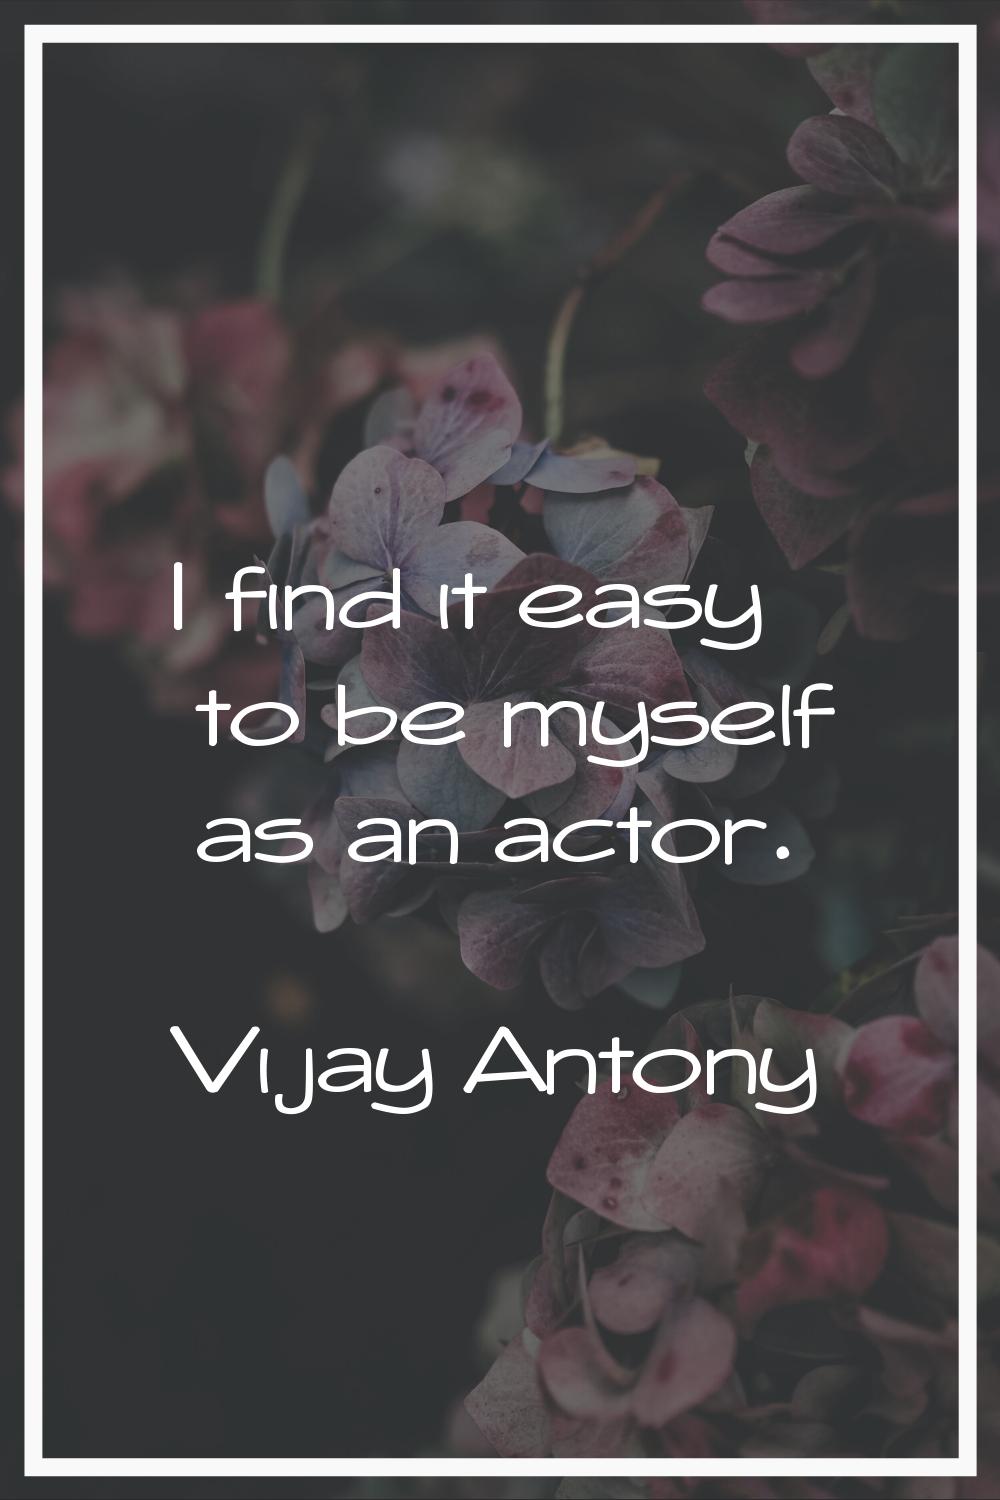 I find it easy to be myself as an actor.